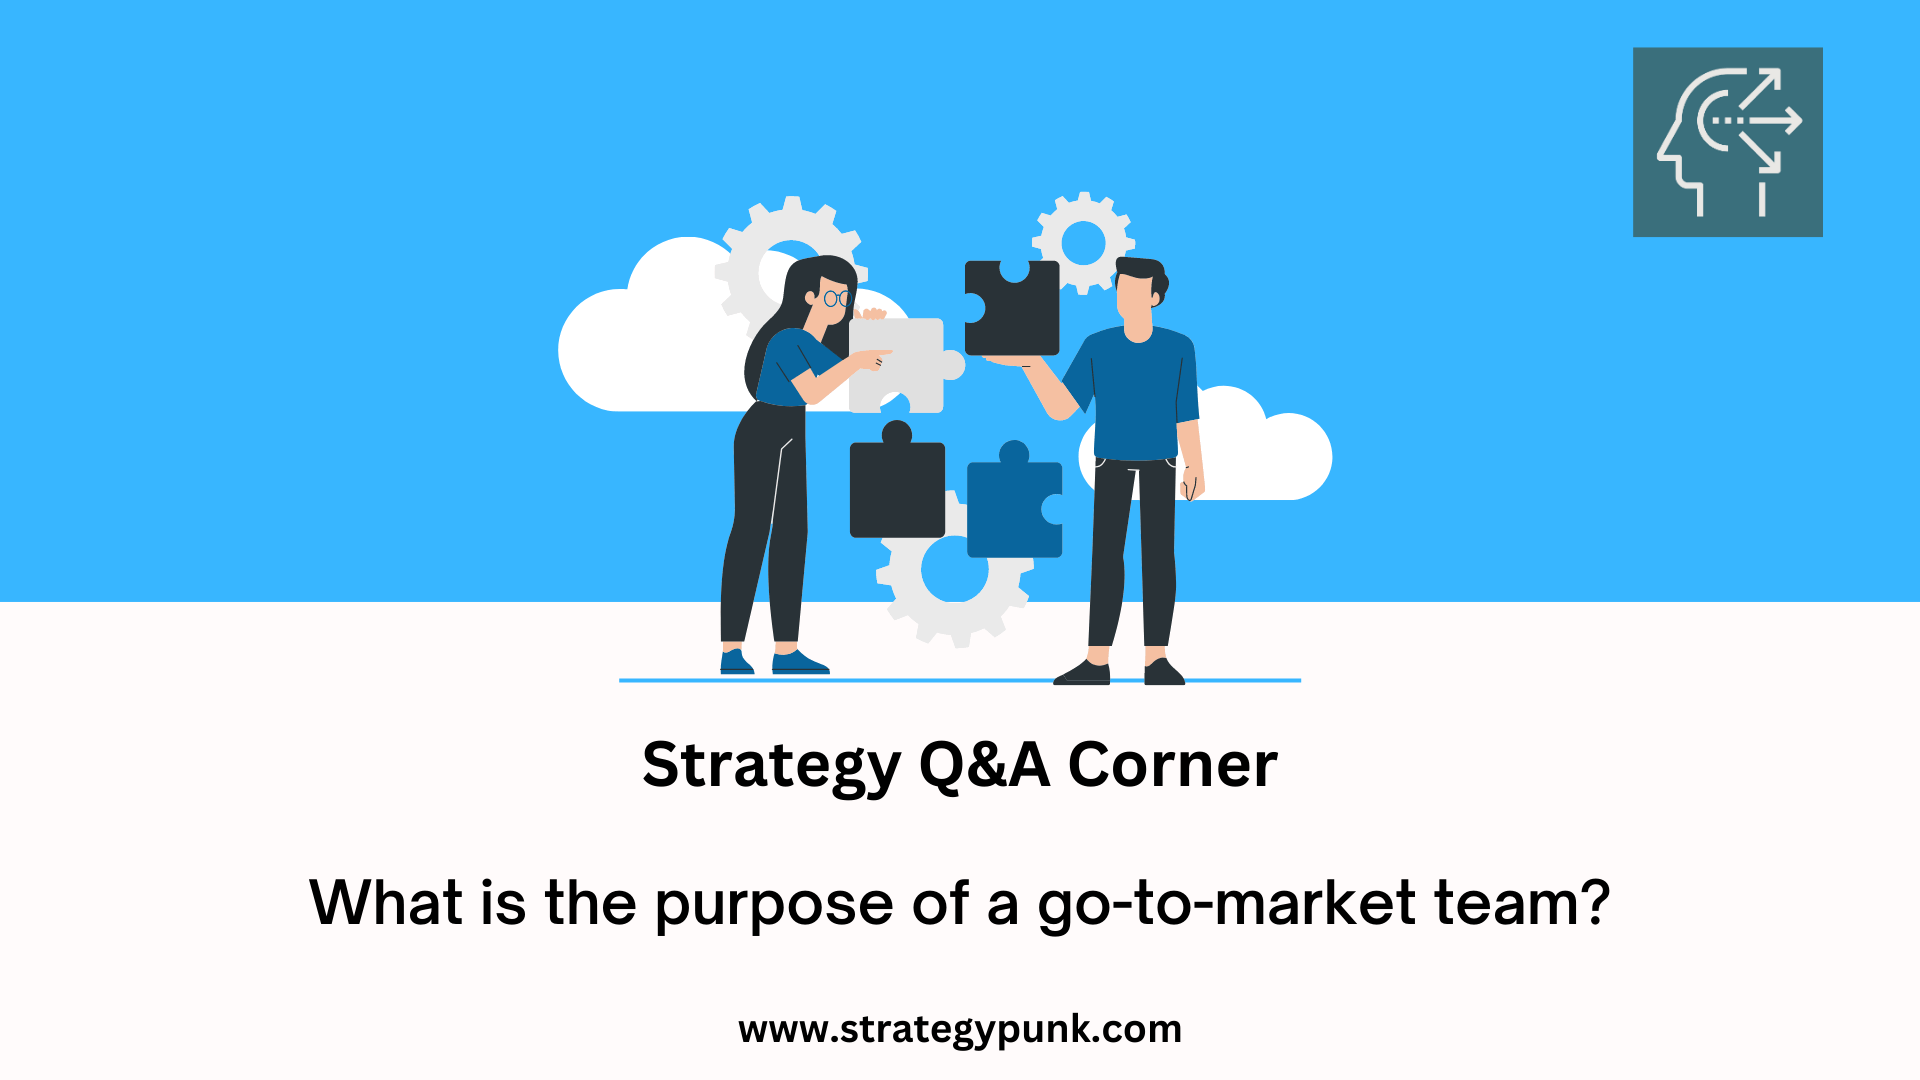 What is the purpose of a go-to-market team?